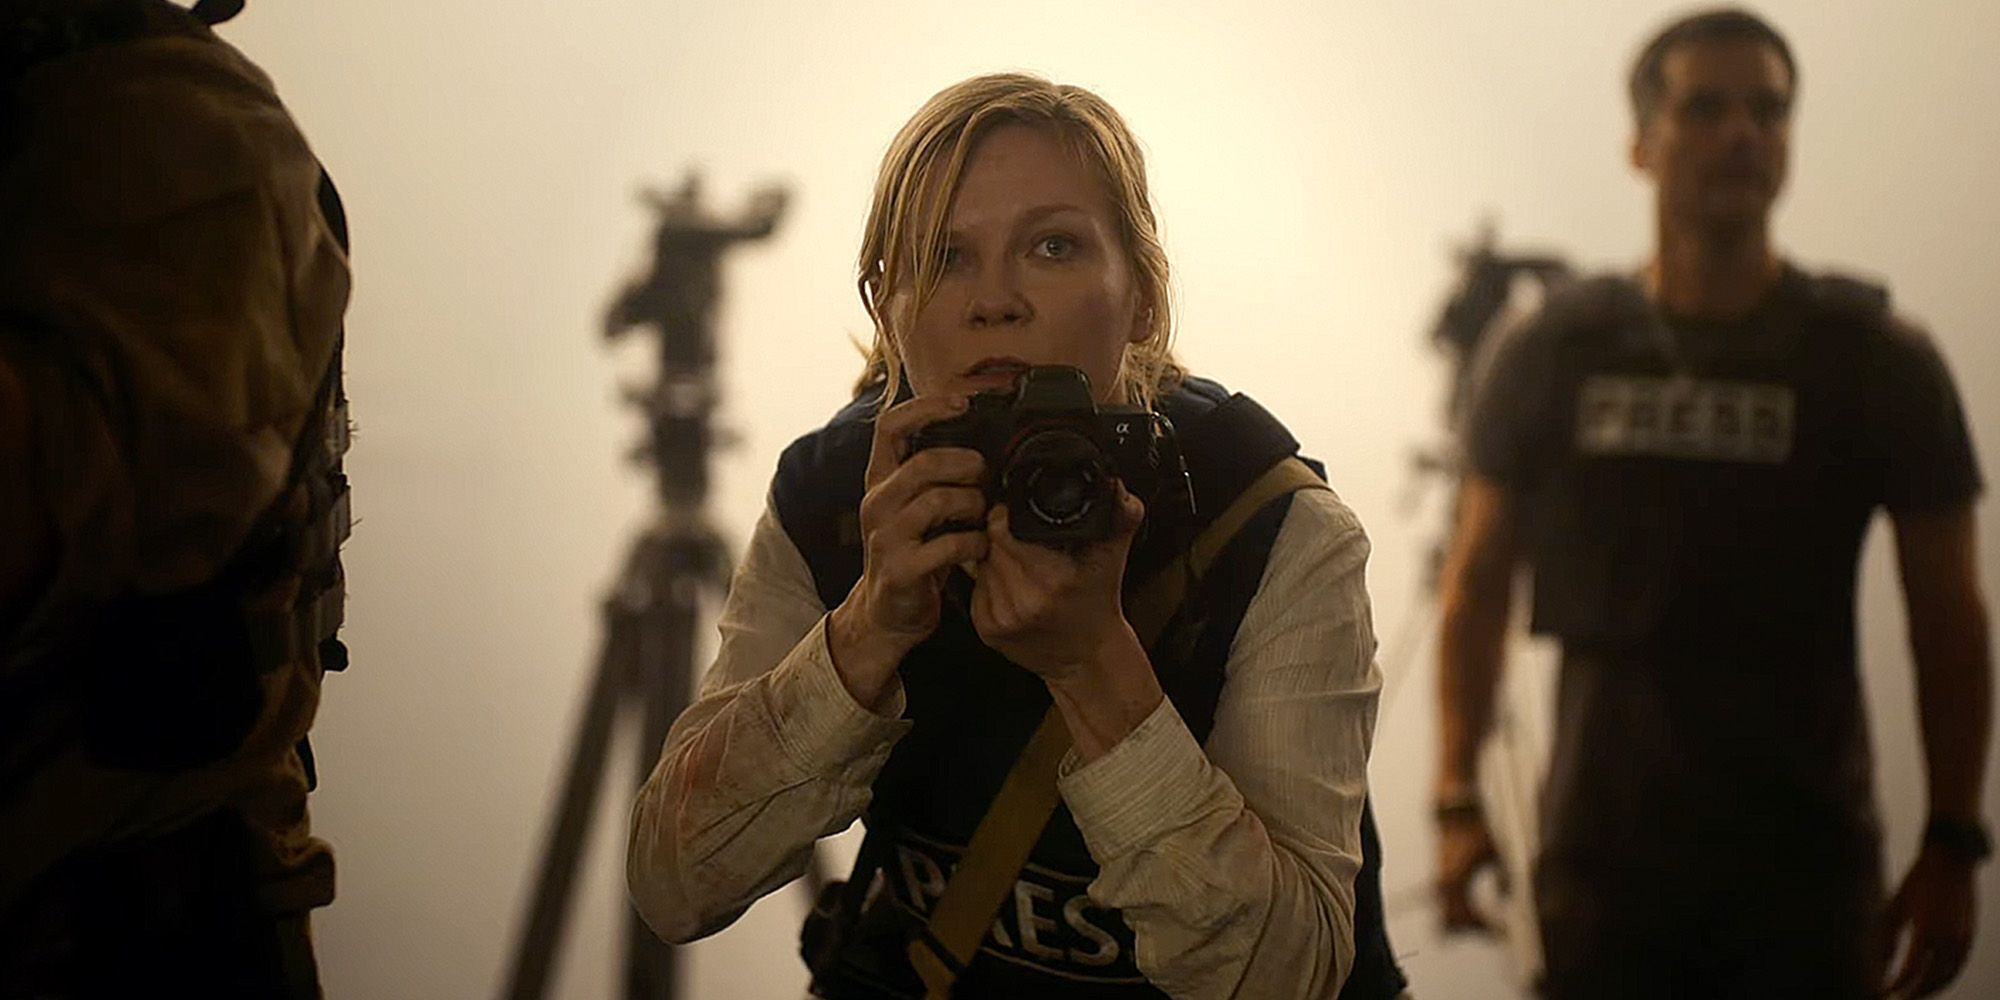 Kirsten Dunst as Lee with a camera while wearing a press vest in Civil War